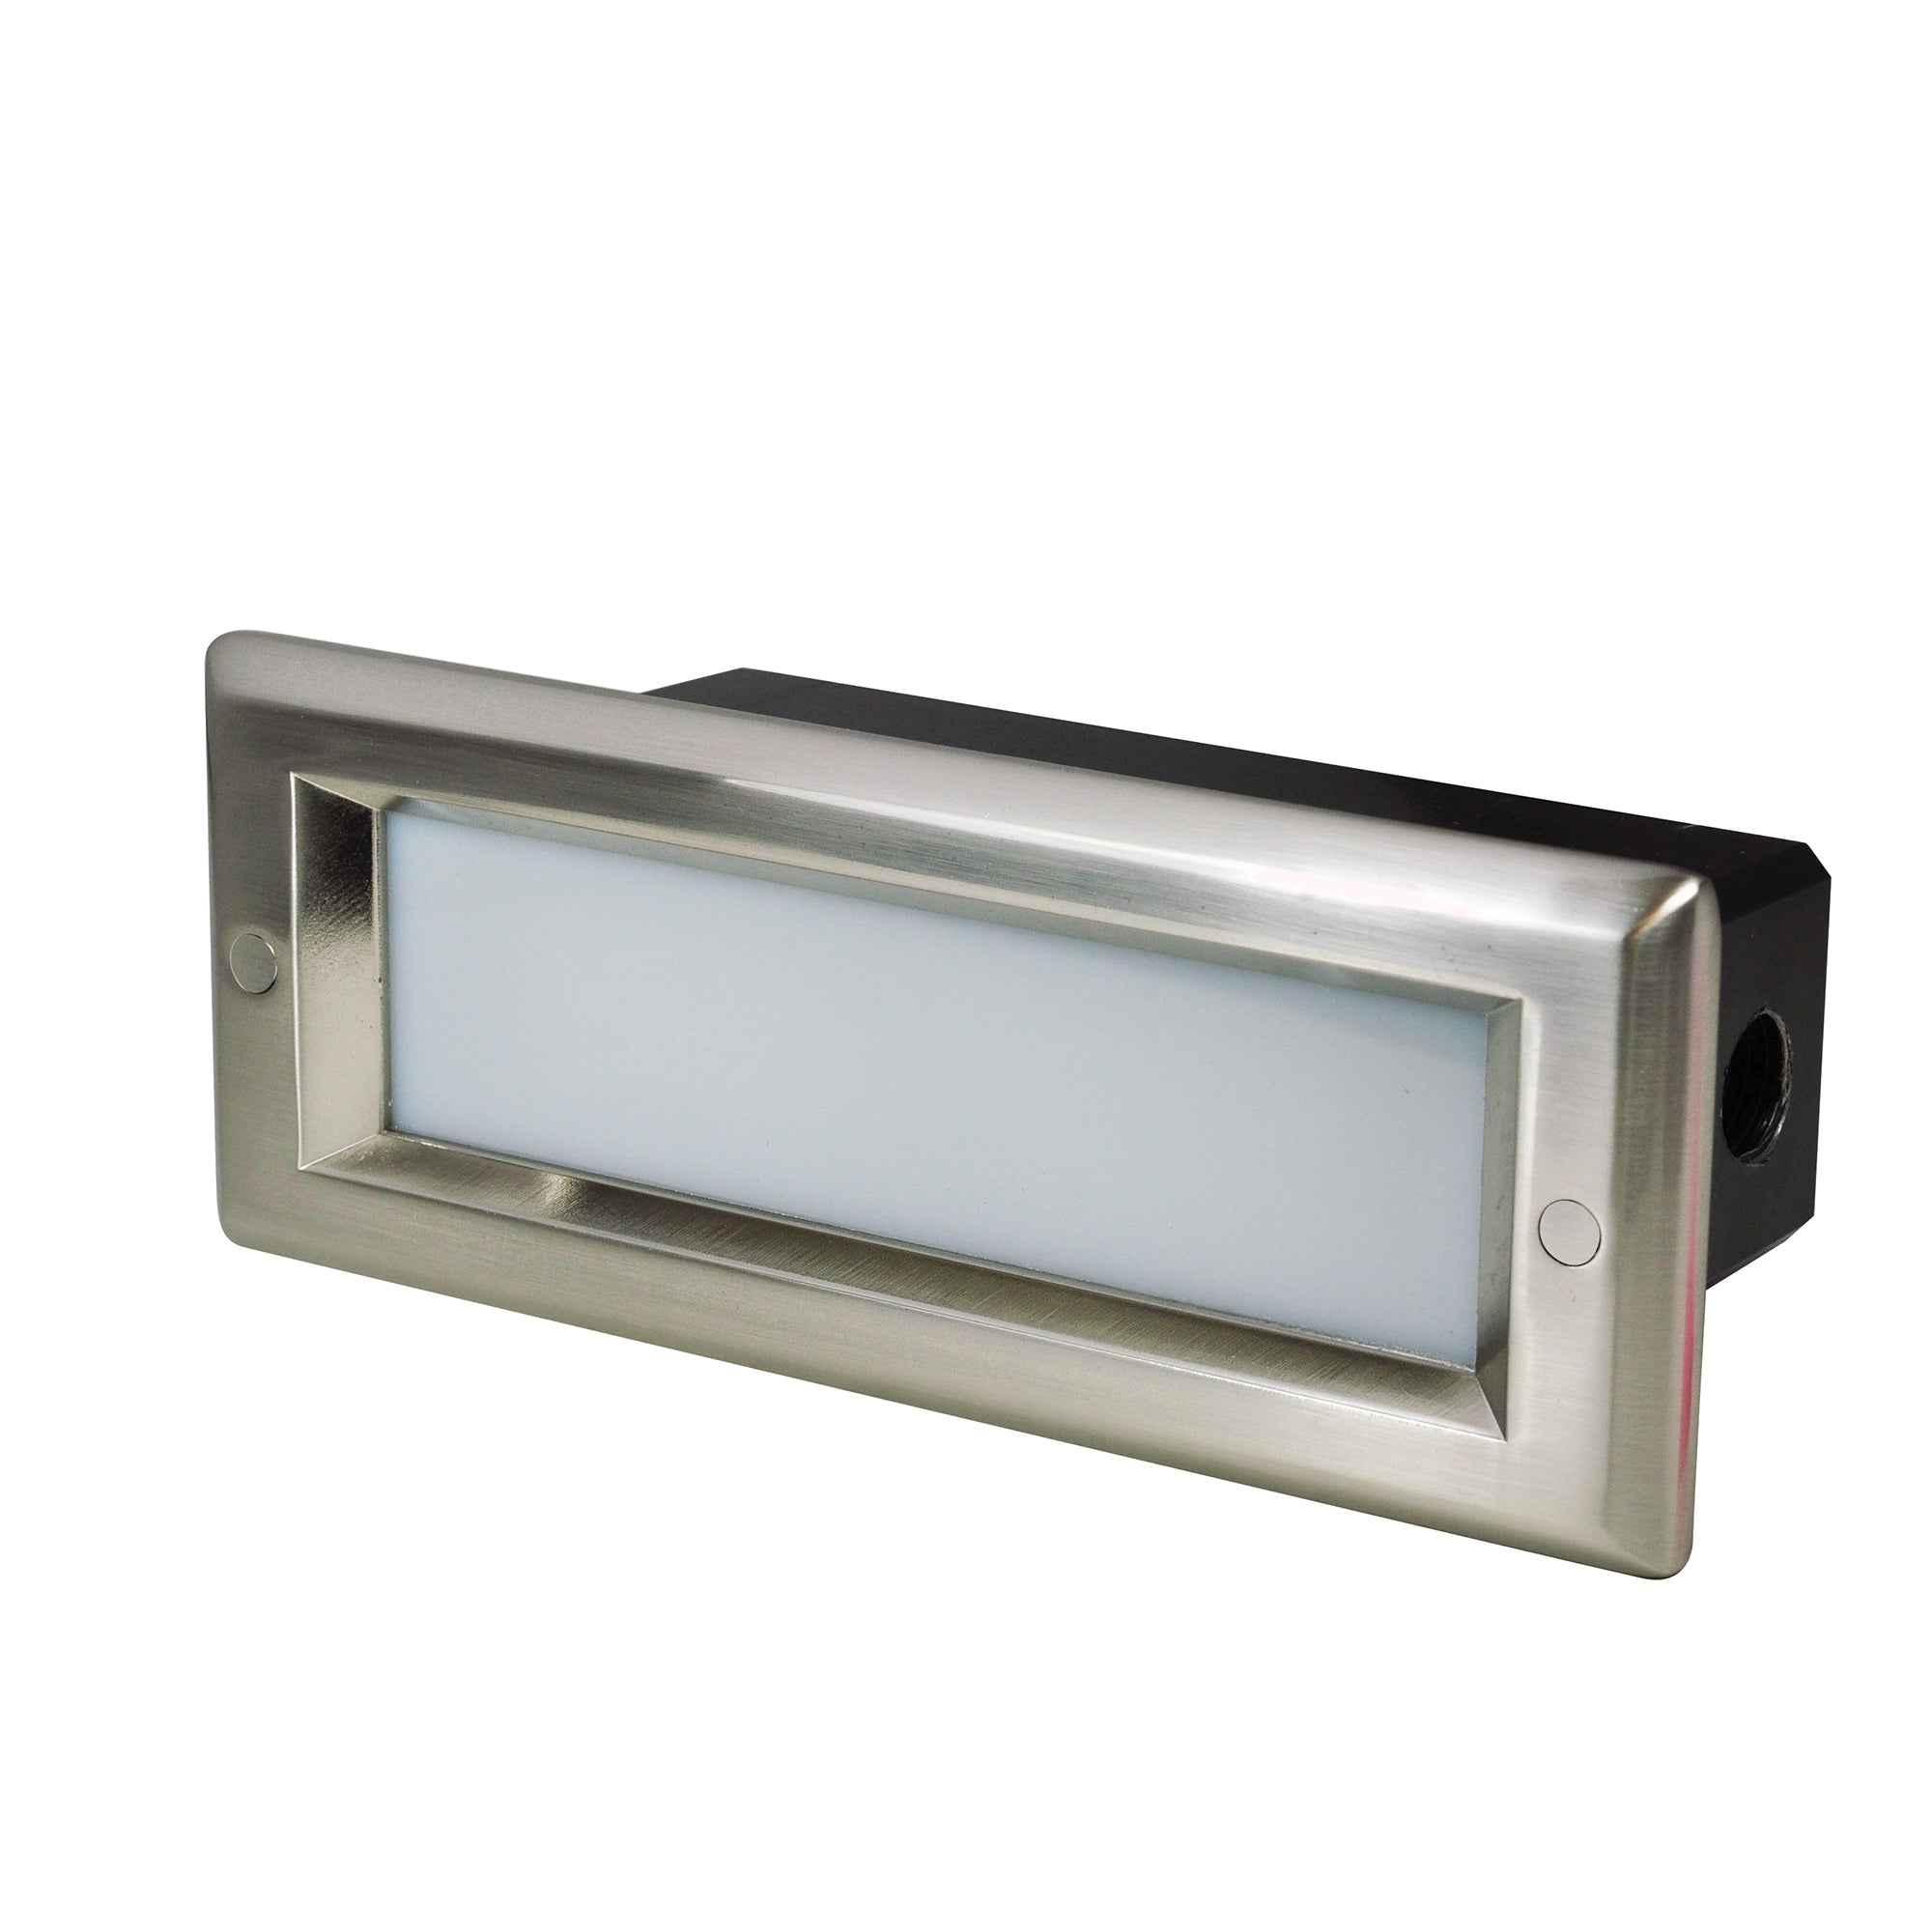 Nora Lighting NSW-842/32BN - Step Light - Brick Die-Cast LED Step Light w/ Frosted Lens Face Plate, 146lm / 4.6W, 3000K, Brushed Nickel Finish